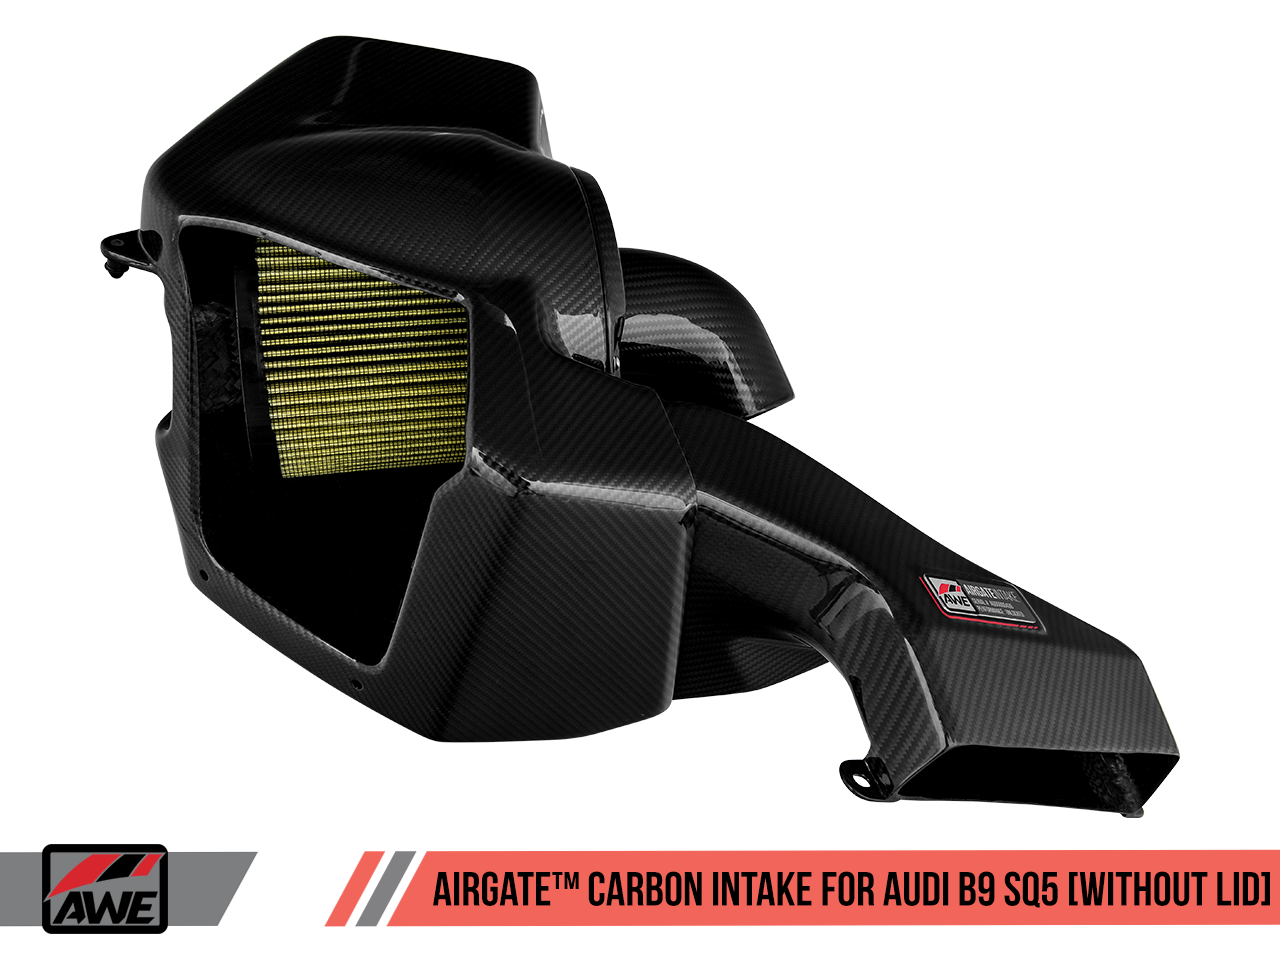 AWE AirGate™ Carbon Fiber Intake for Audi B9 SQ5 3.0T - Without Lid